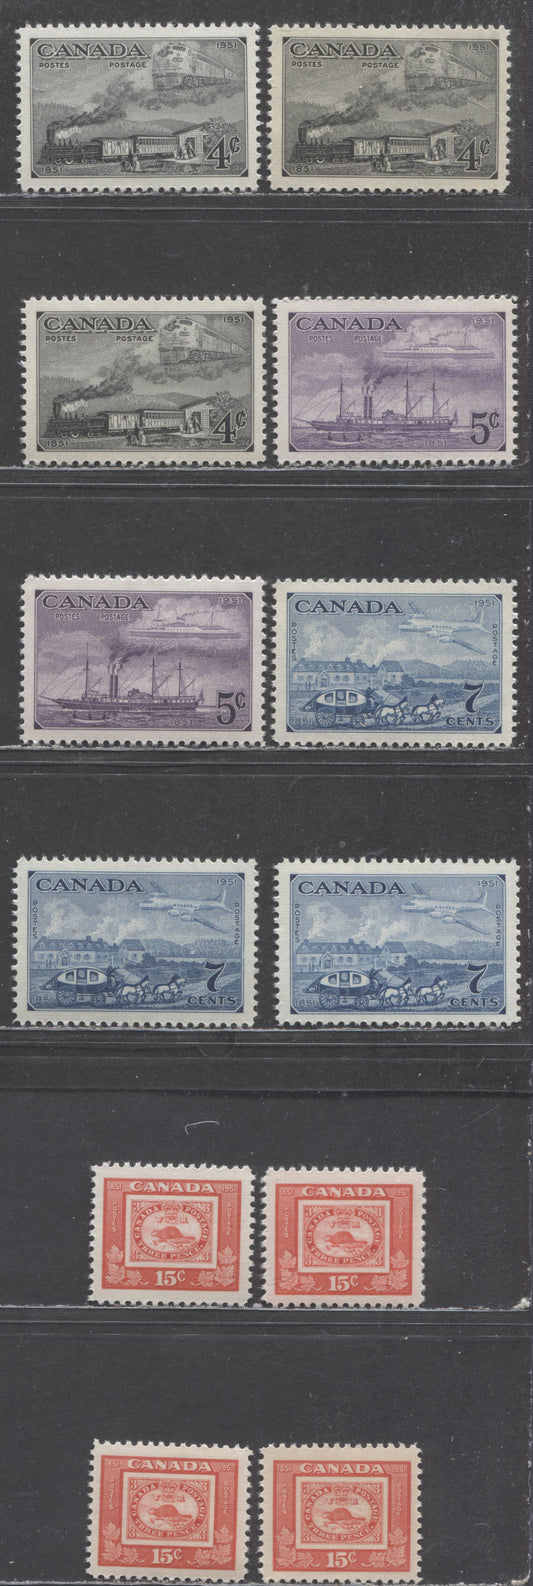 Lot 395 Canada #311-314 4c-15c Train, Steamship, Mail Coach & Threepenny Beaver, 1951 CAPEX '51, 12 VFNH Singles,Cream & White Horizontal, Smooth & Vertically Ribbed Papers, Different Shades Cream and Yellowish Cream Semi-Gloss & Glossy Gums